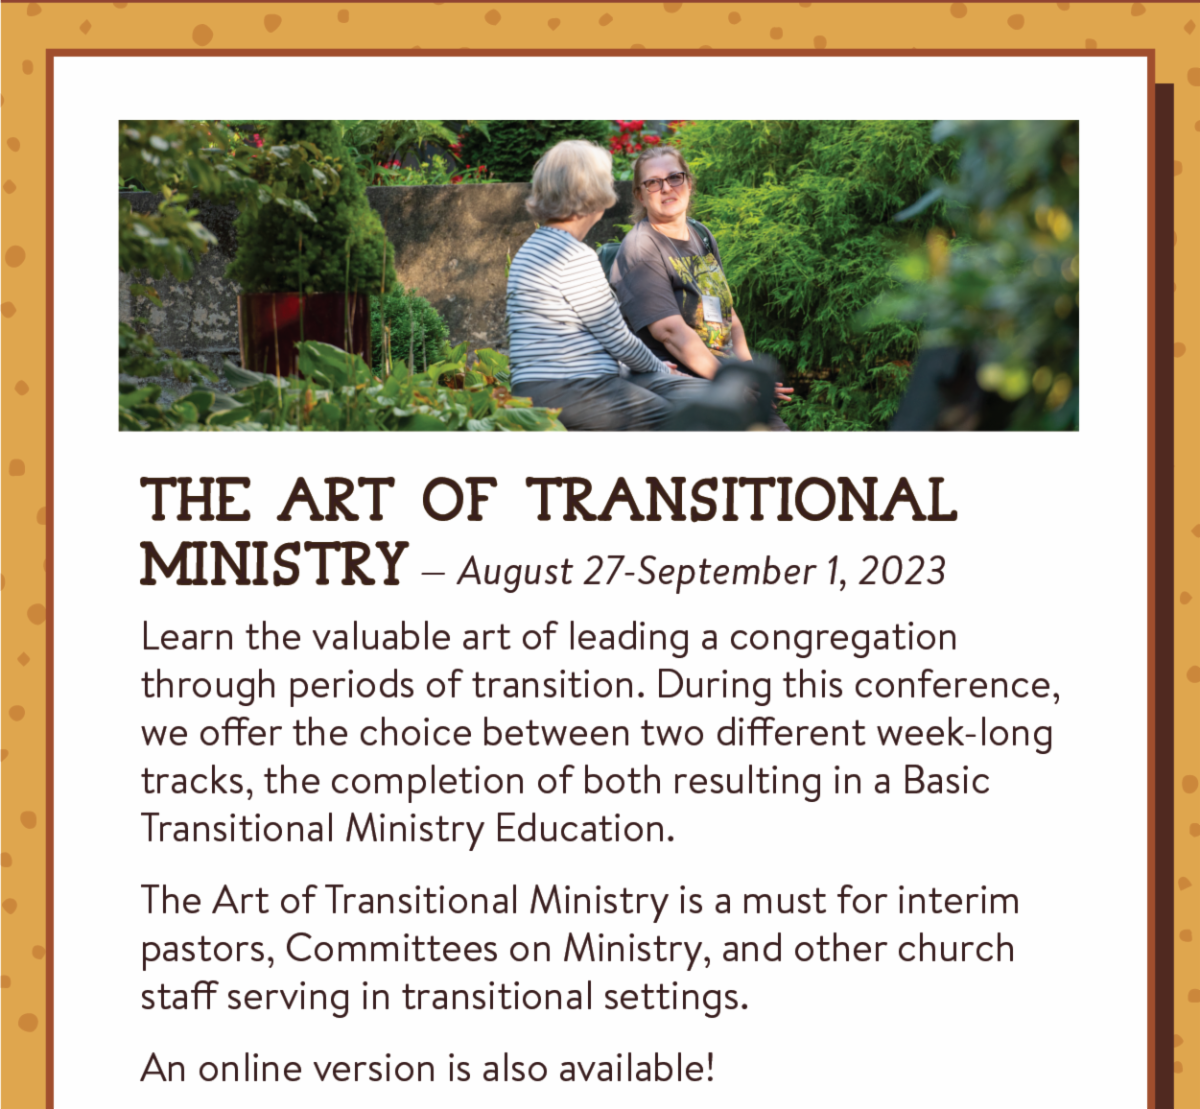 The Art of Transitional Ministry — August 27-September 1, 2023: Learn the valuable art of leading a congregation through periods of transition. During this conference, we offer the choice between two different week-long tracks, the completion of both resulting in a Basic Transitional Ministry Education.  The Art of Transitional Ministry is a must for interim pastors, Committees on Ministry, and other church staff serving in transitional settings. An online version is also available!